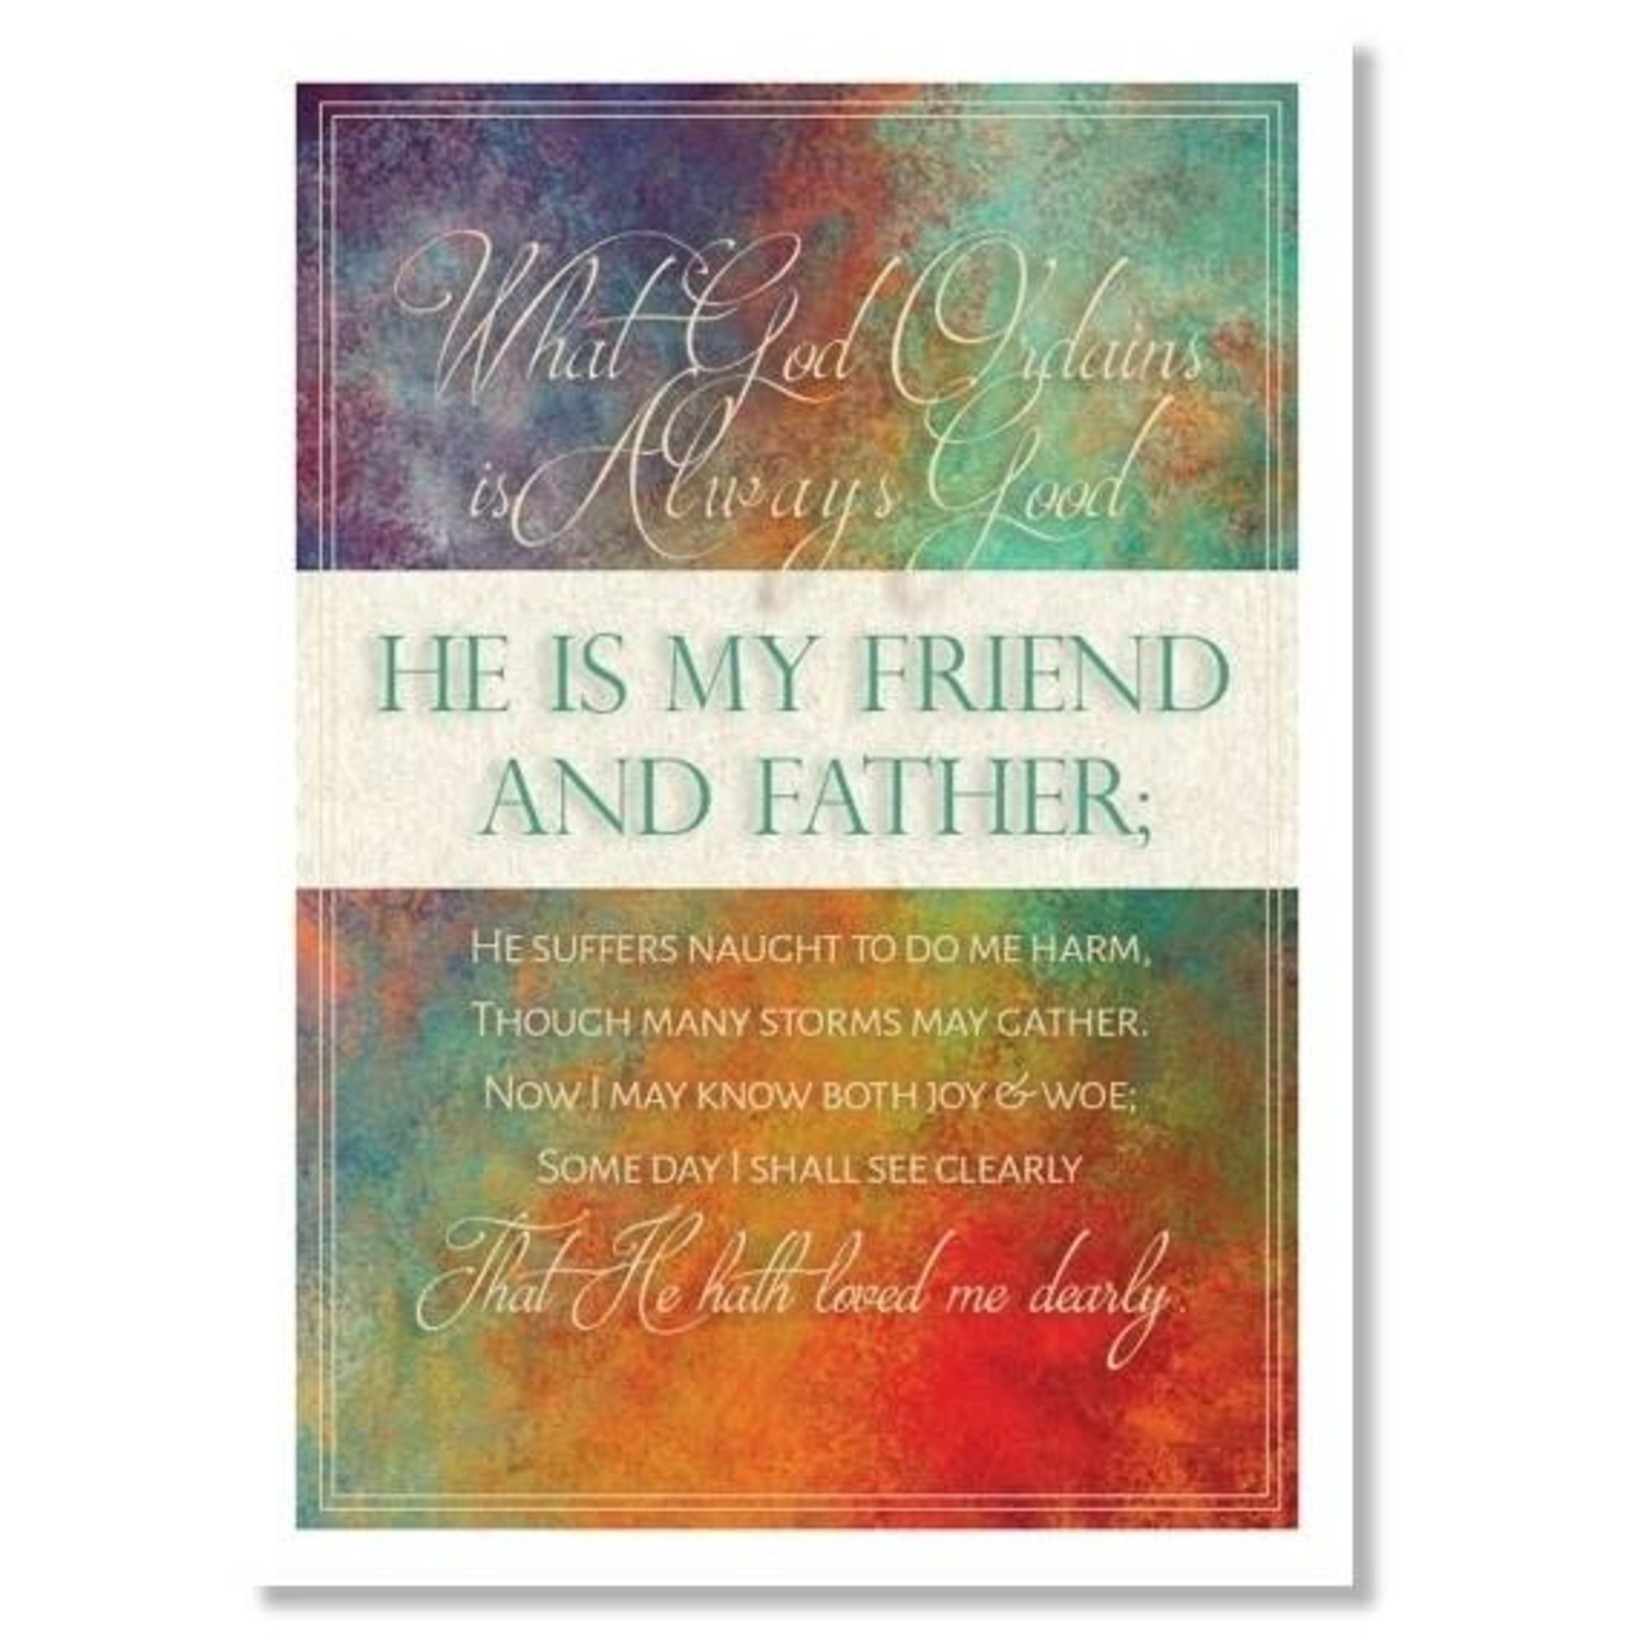 Hymns In My Heart - 5x7" Greeting Card - Encouragement - What God Ordains